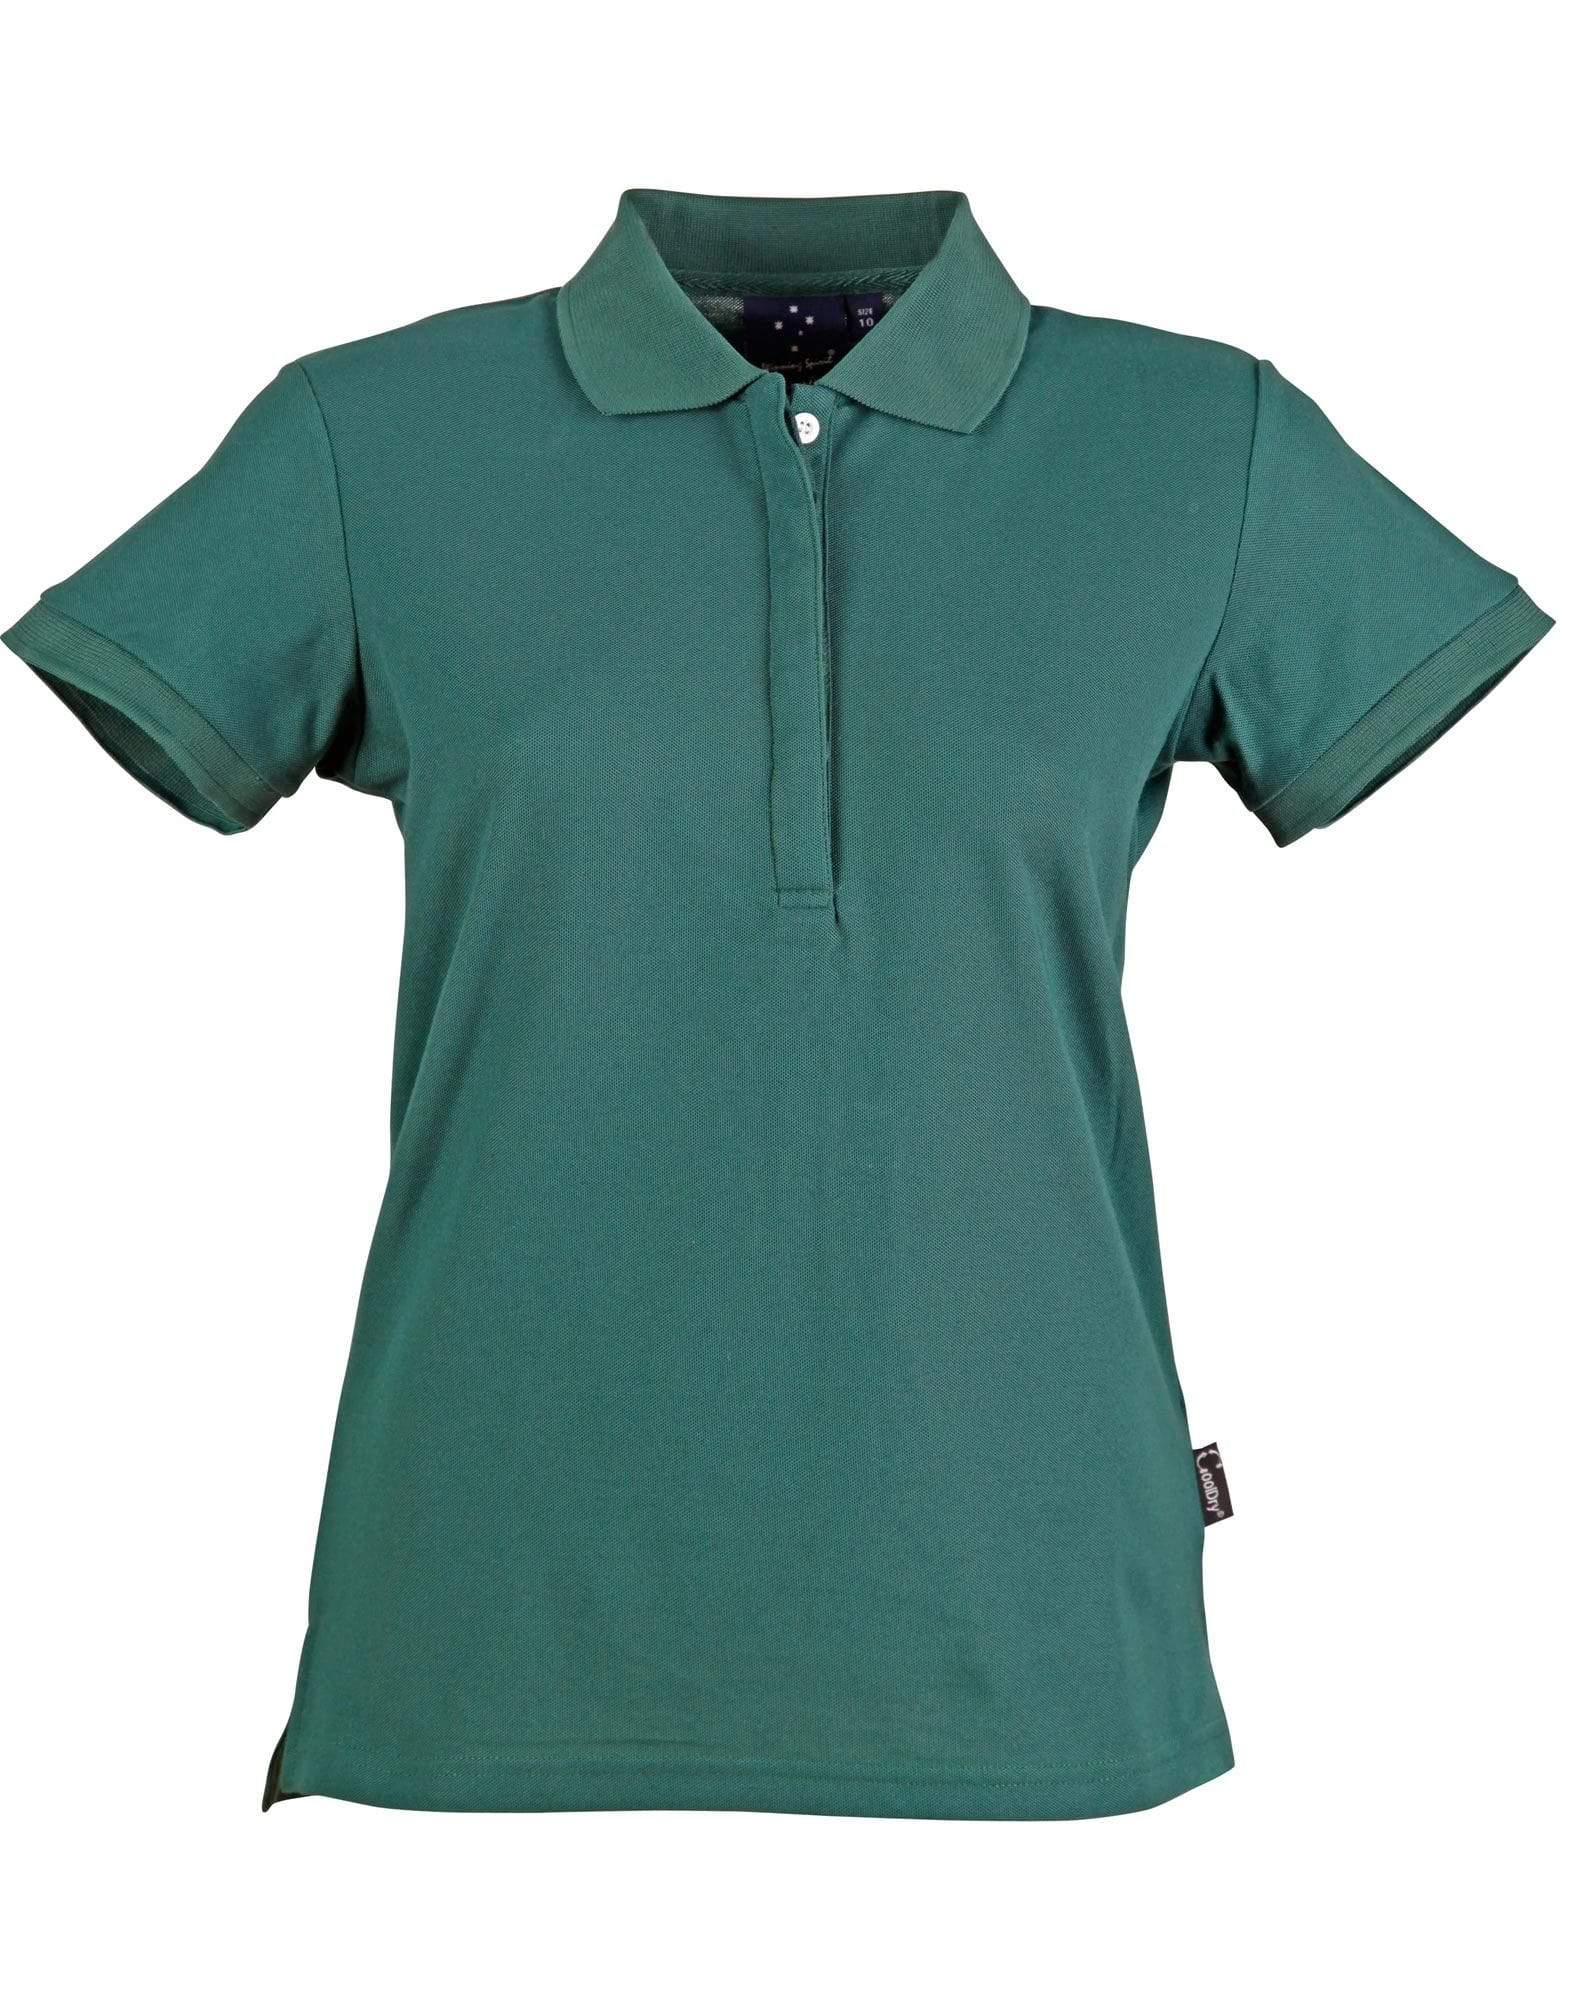 Connection Polo Ladies' Ps64 Casual Wear Winning Spirit Bottle 8 